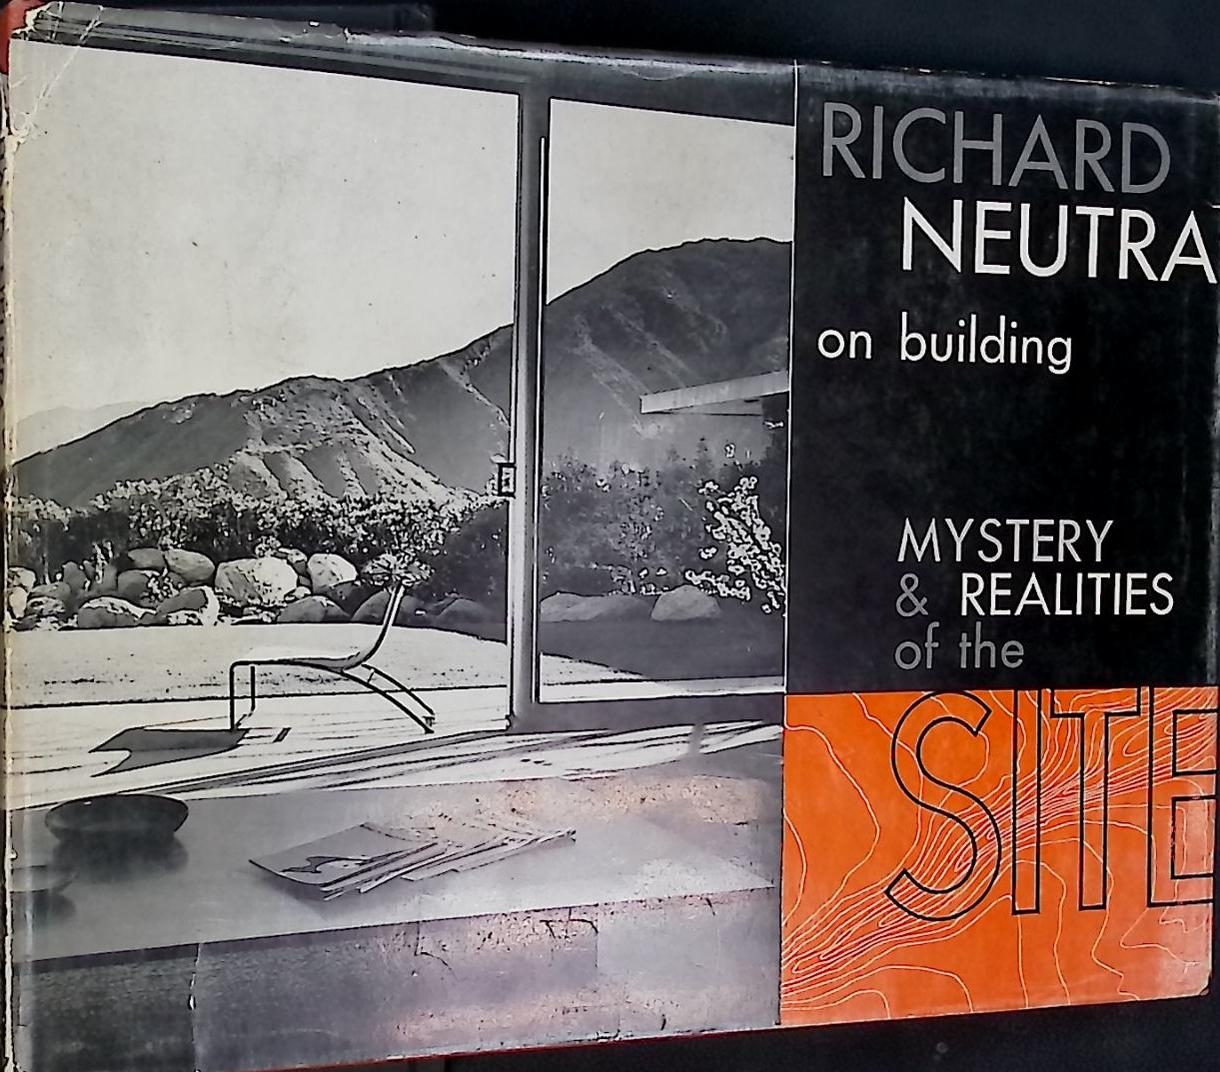 Richard Neutra On Building. Mysteries and Realities of the Site.